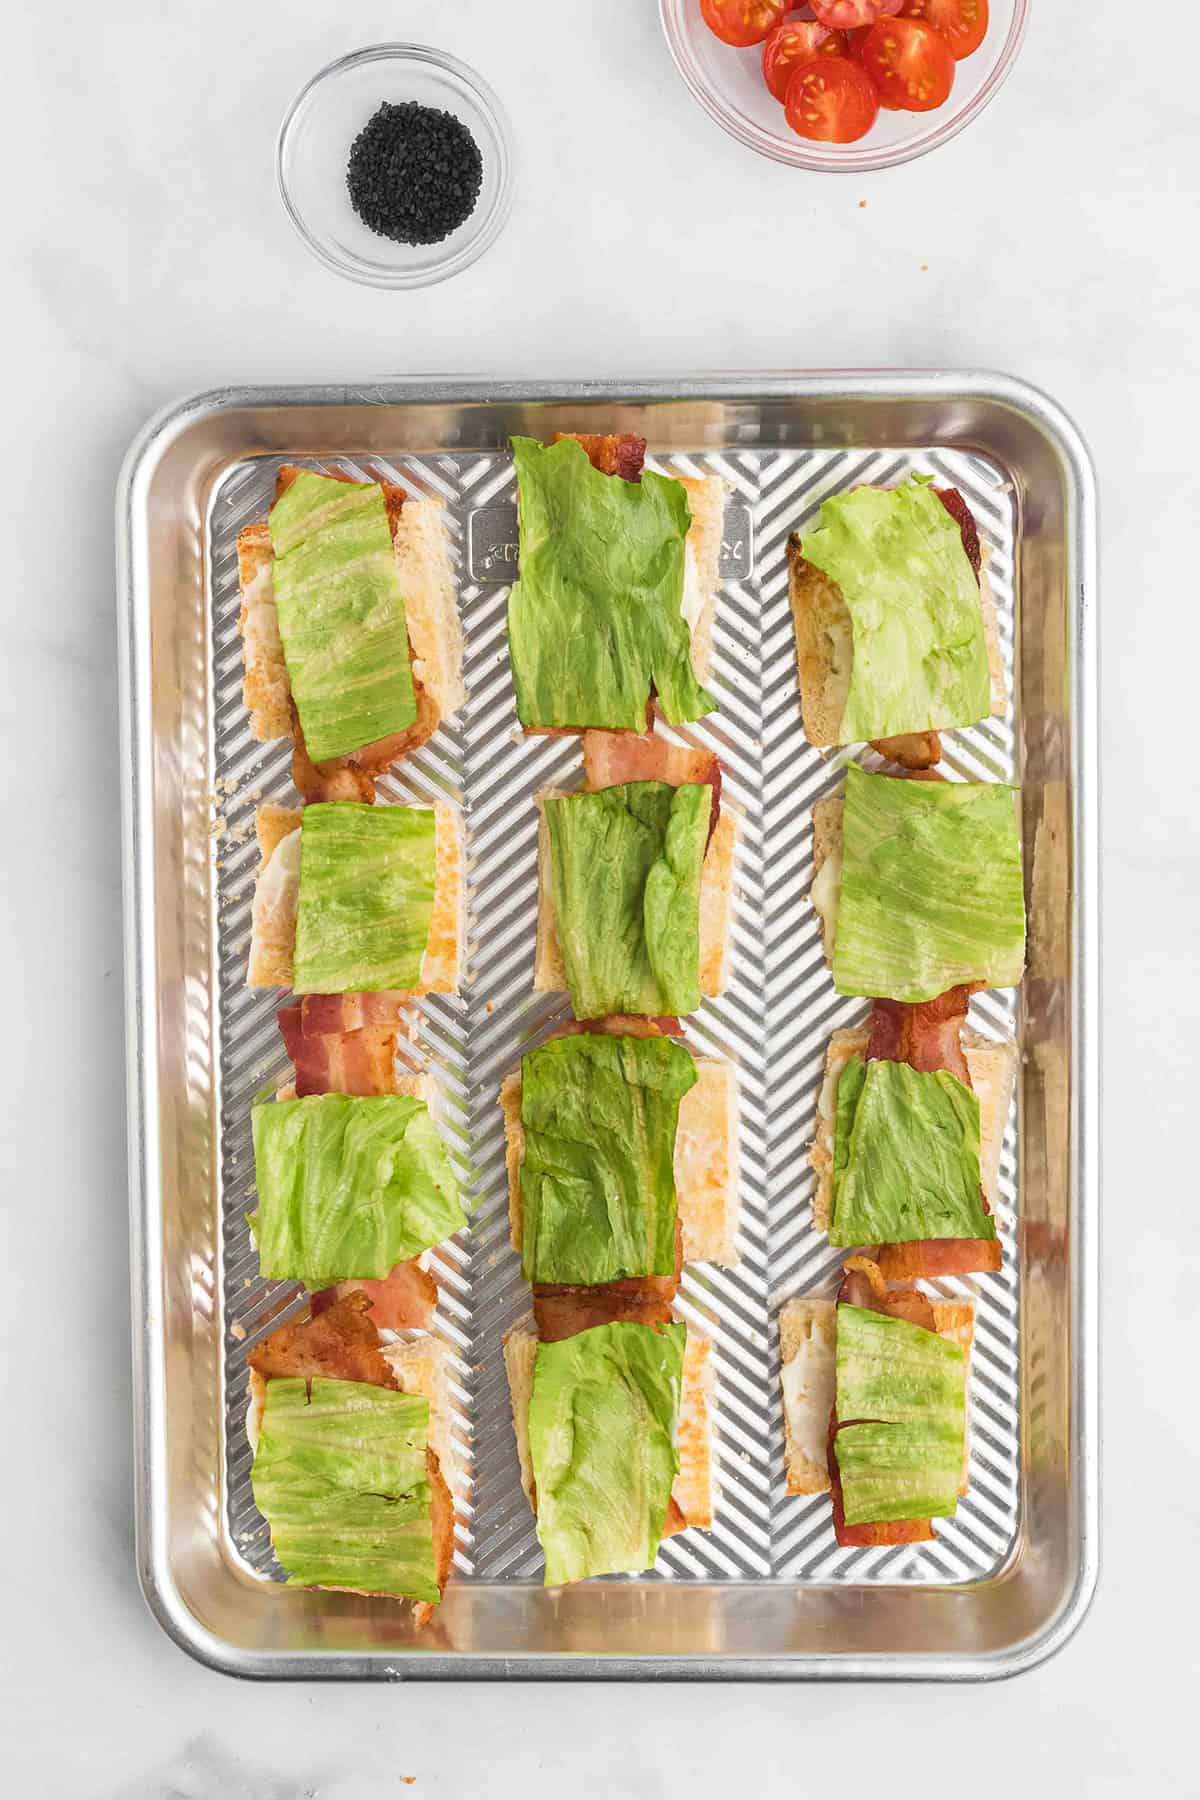 Lettuce pieces added on top of bacon.